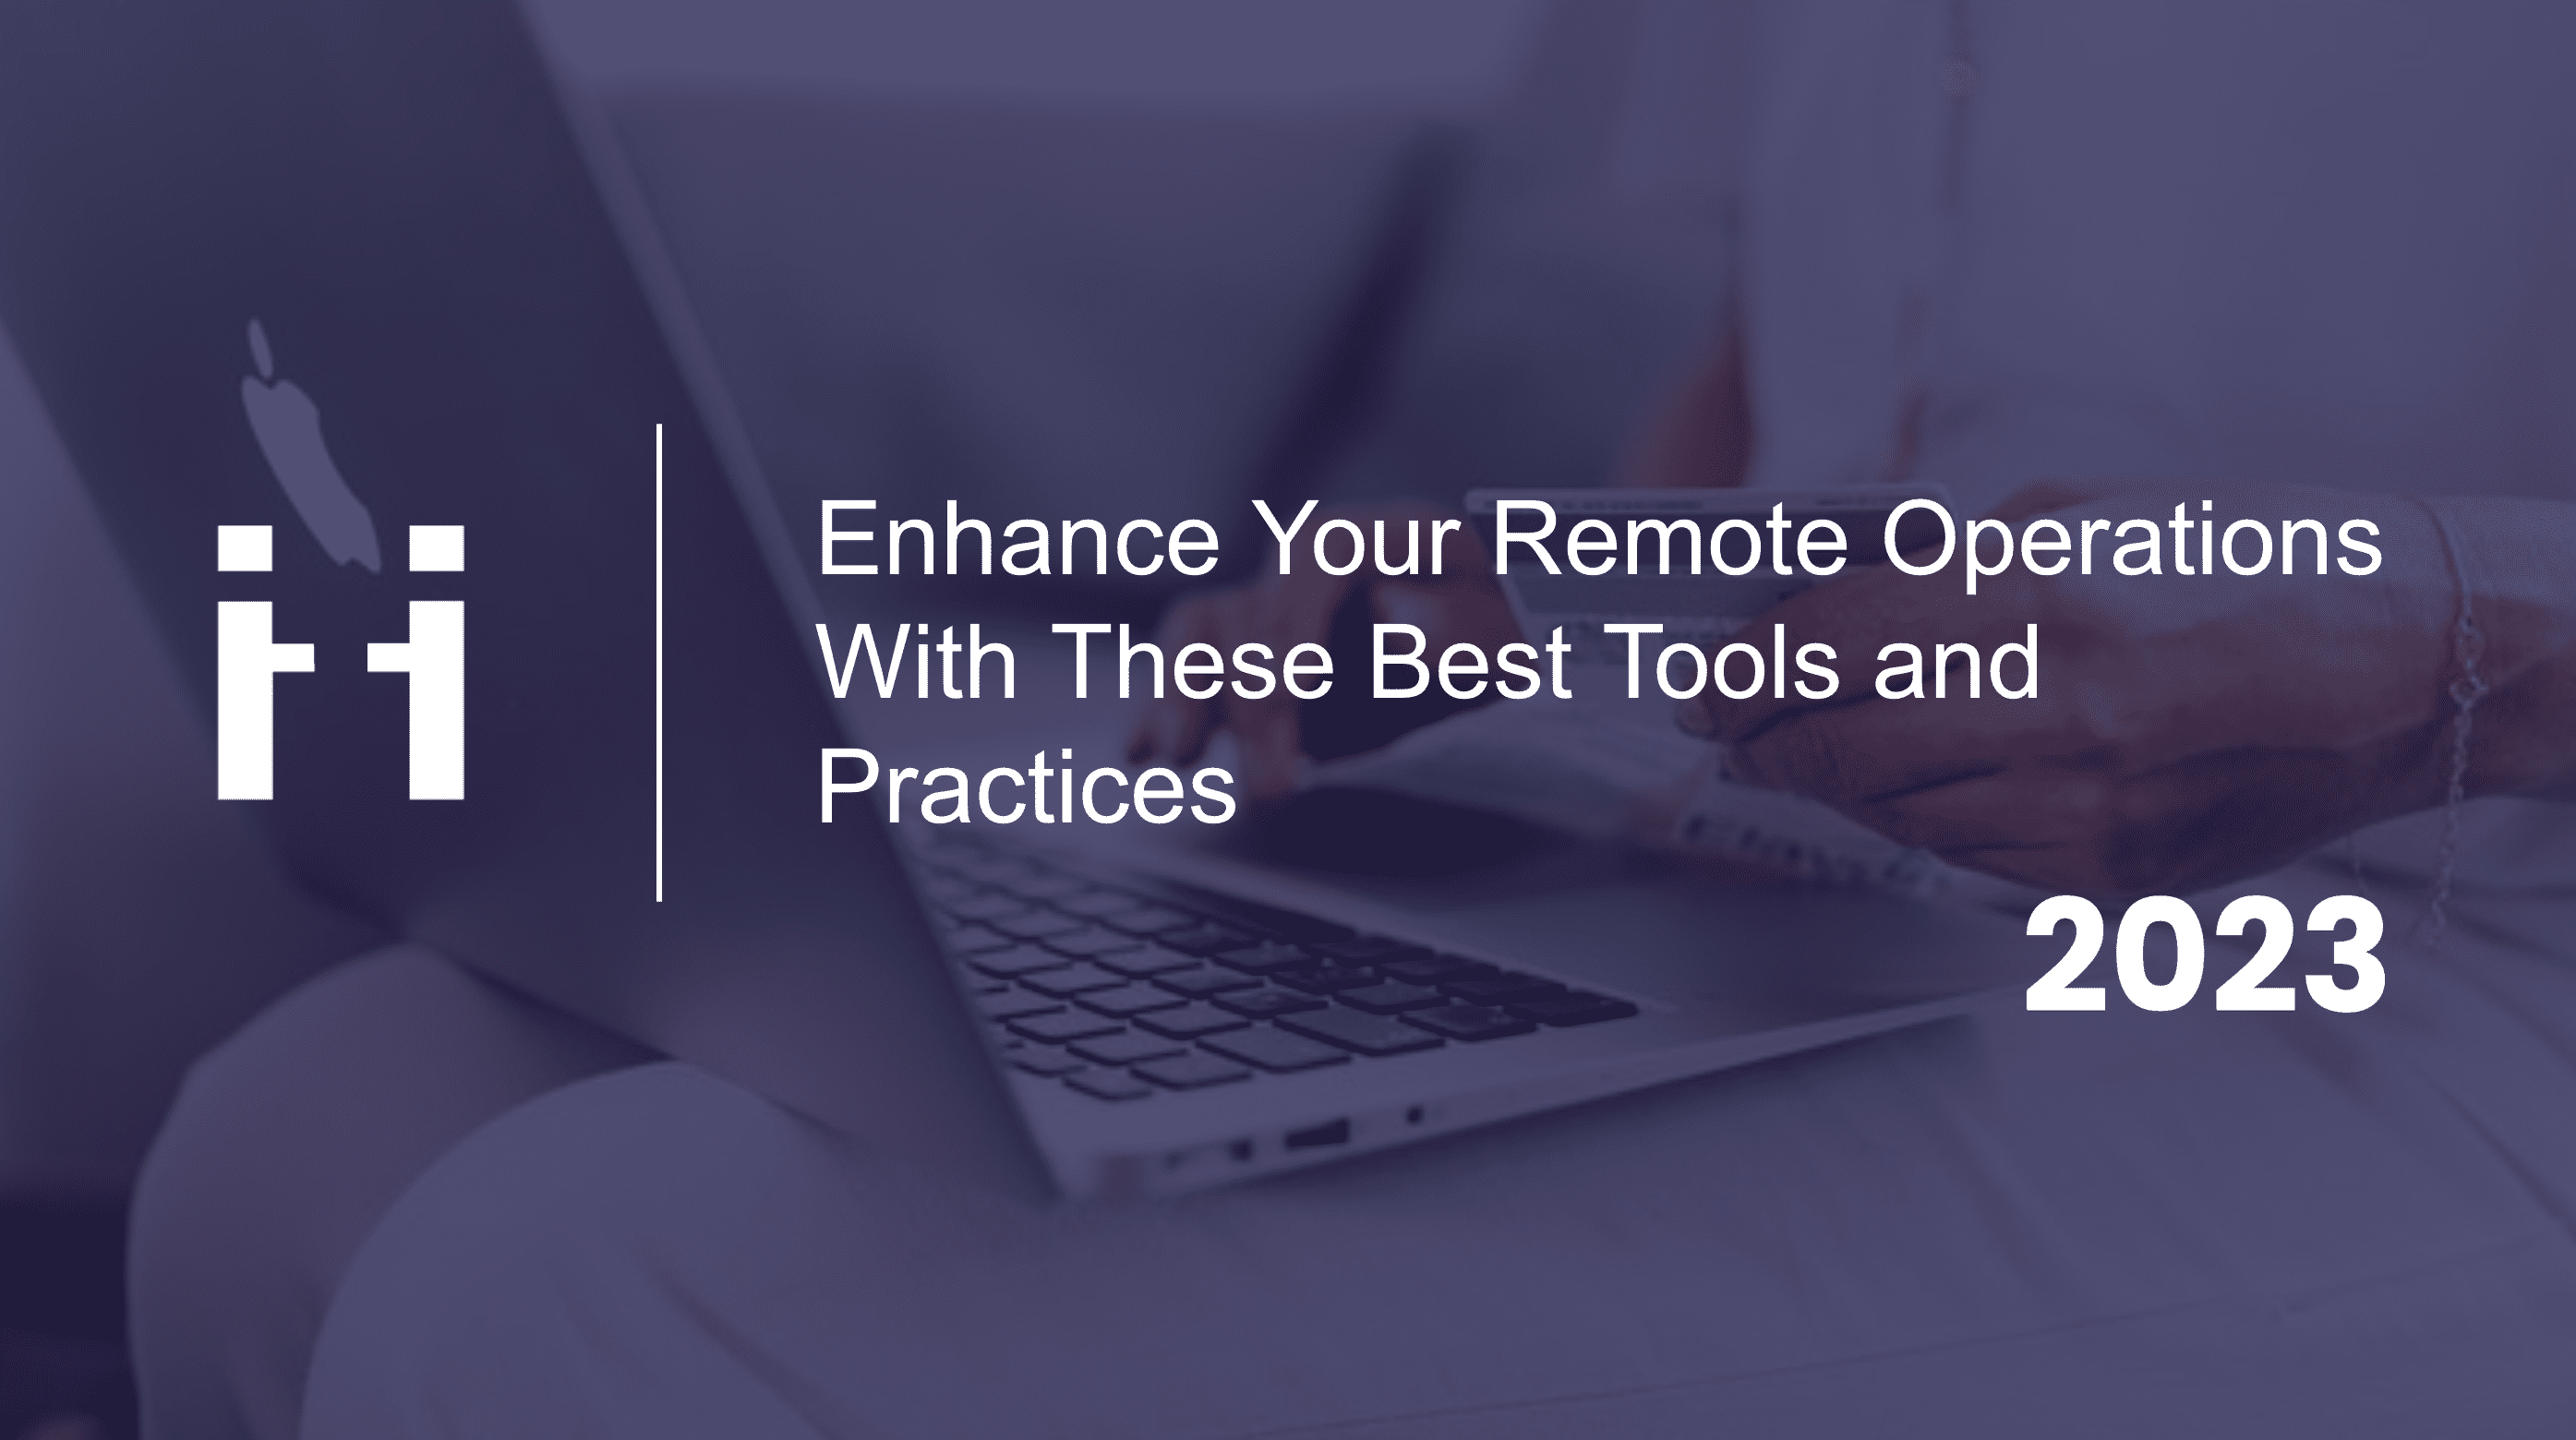 remote operations and remote work best tools and practices to implement